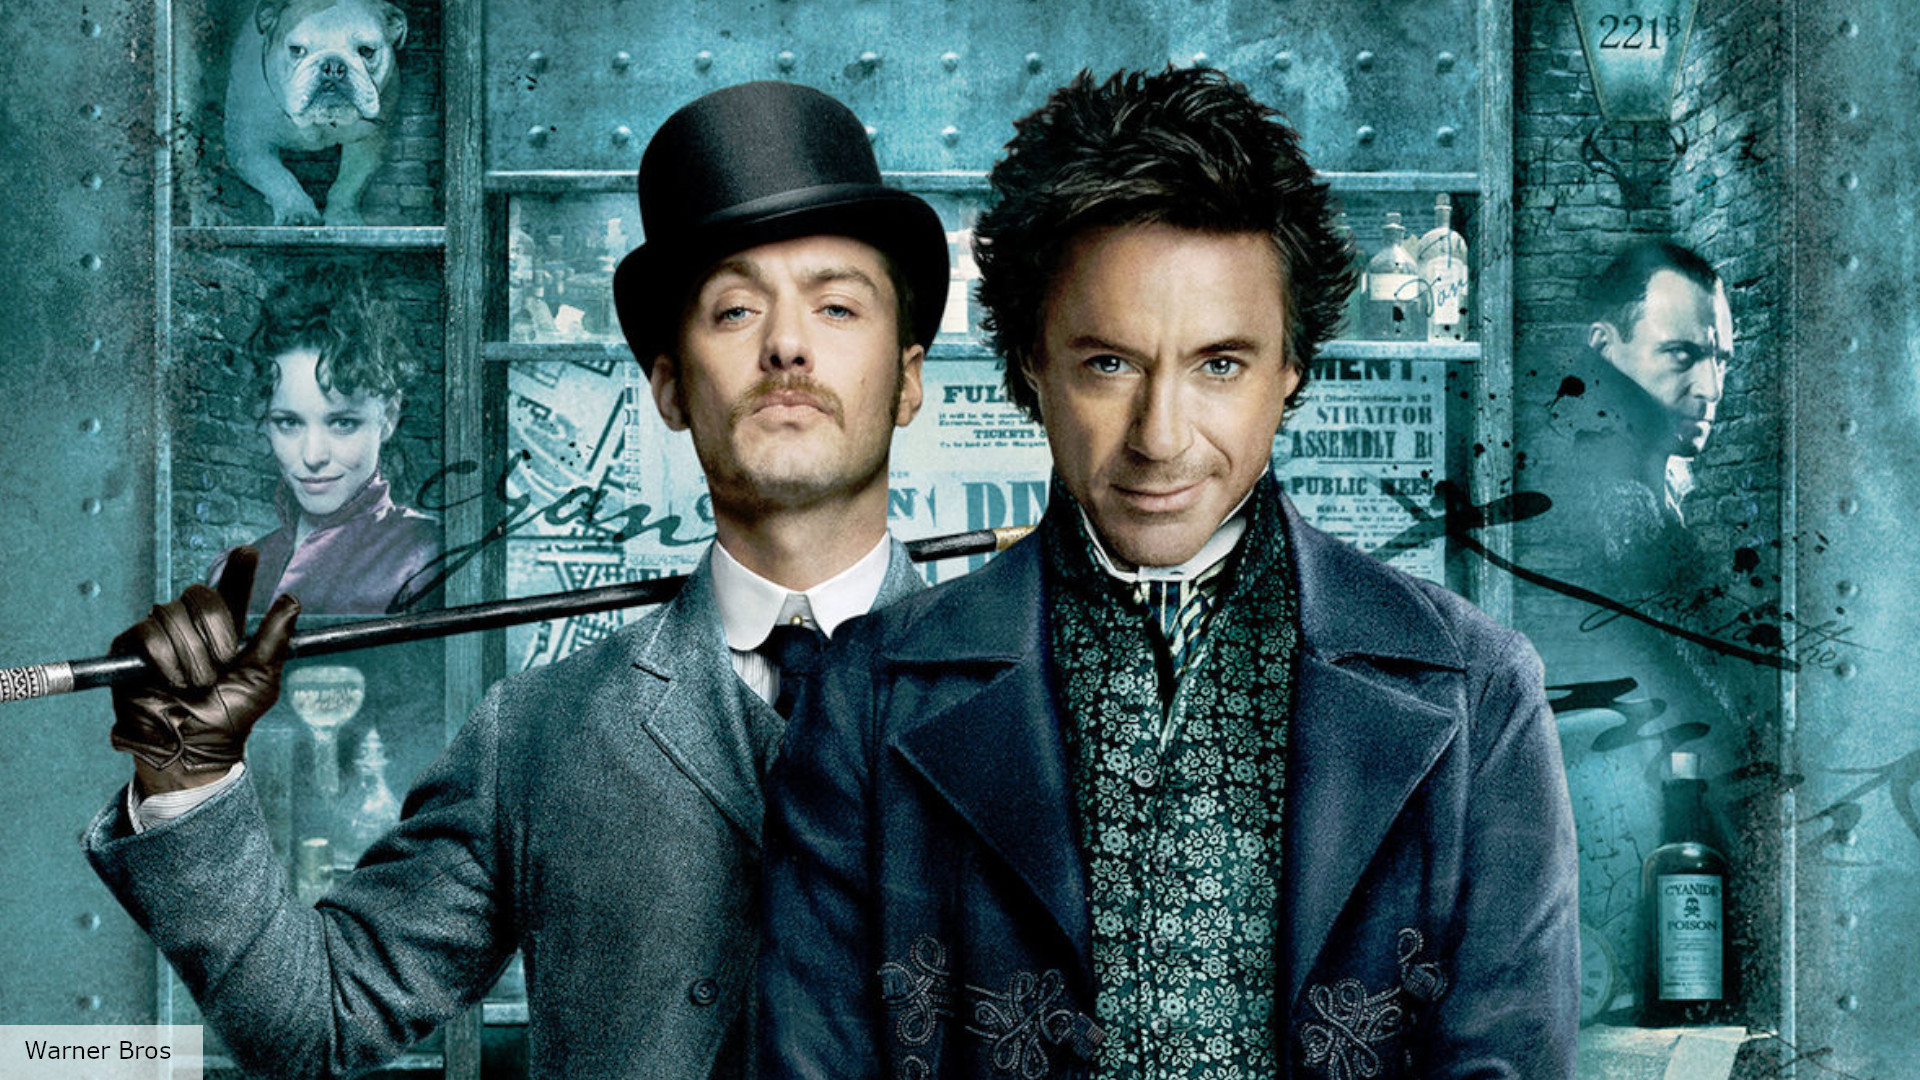 Sherlock Holmes 3 release date speculation, cast, plot, and more The